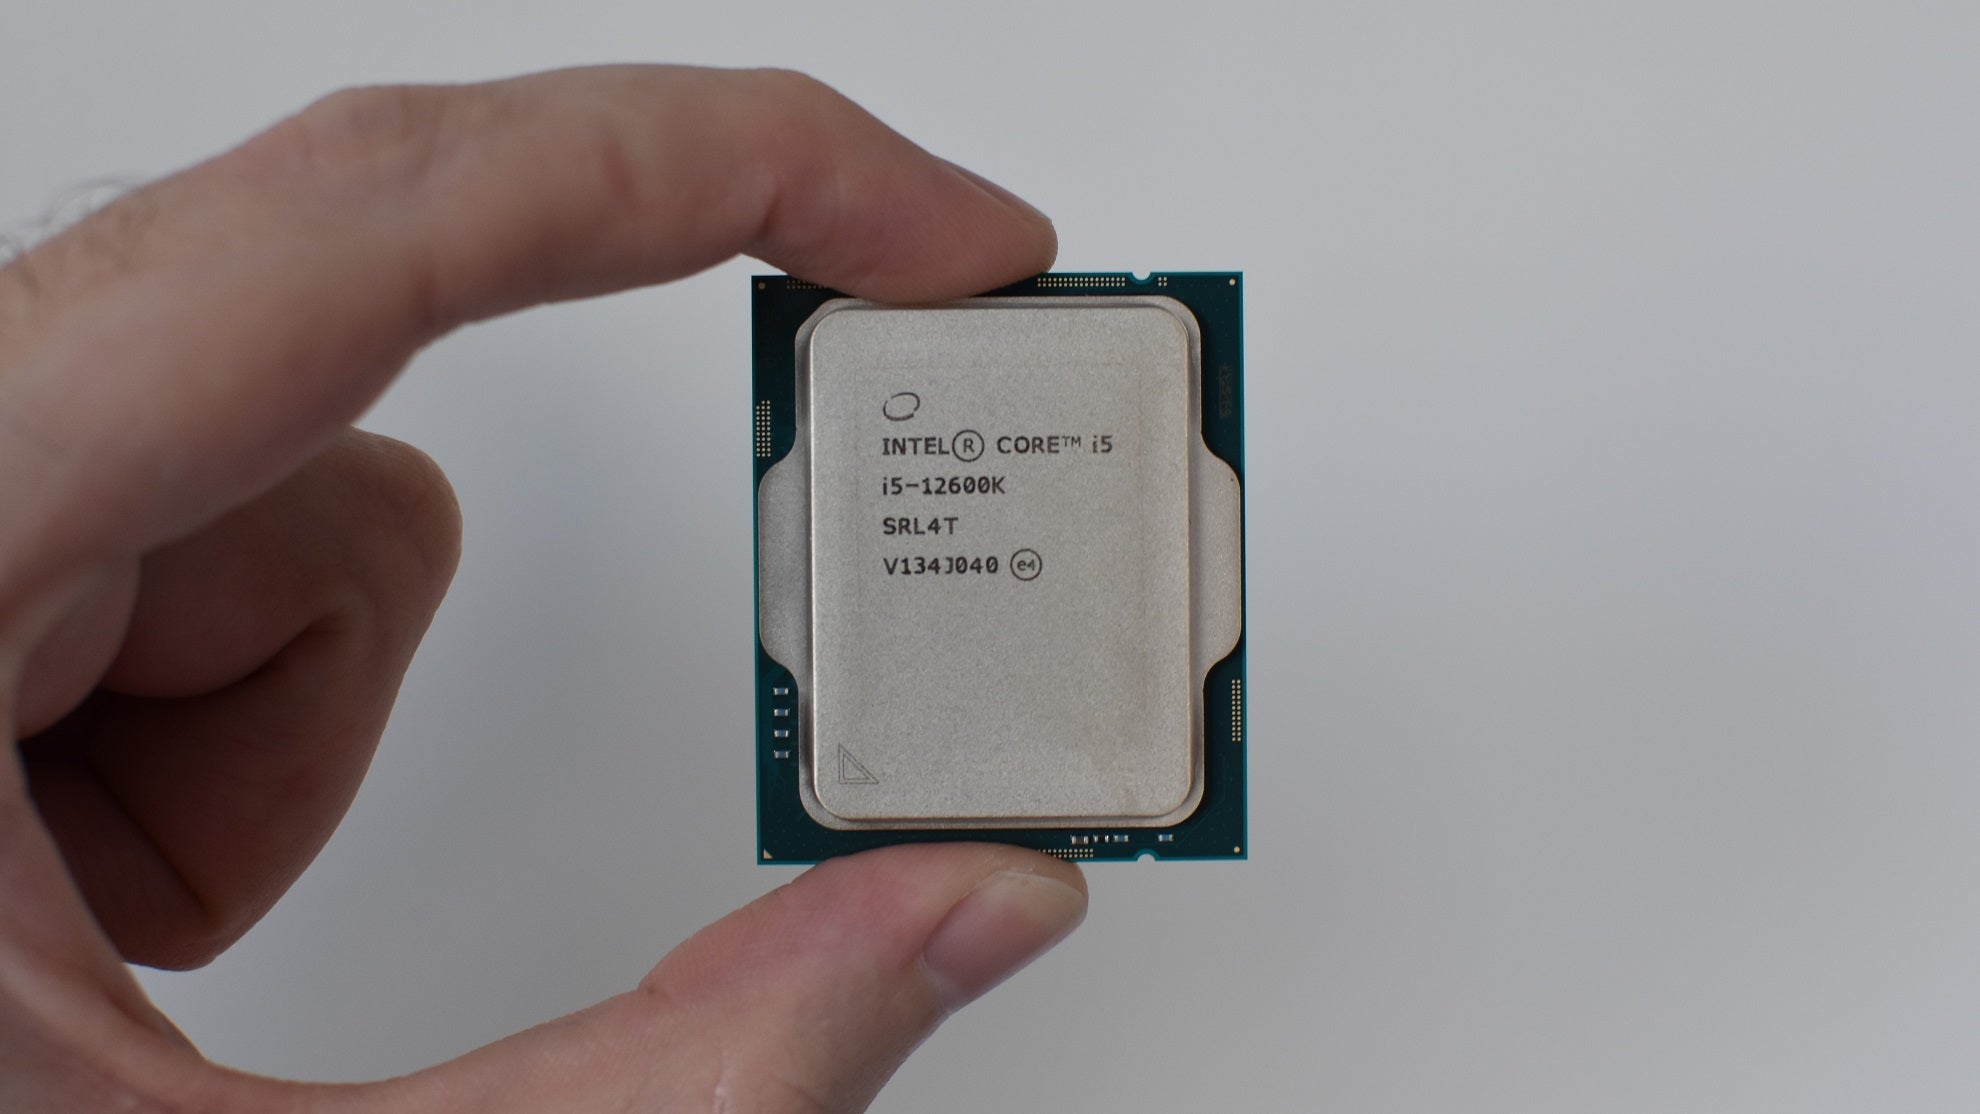 An Intel Core i5-12600K CPU being held between a finger and thumb.